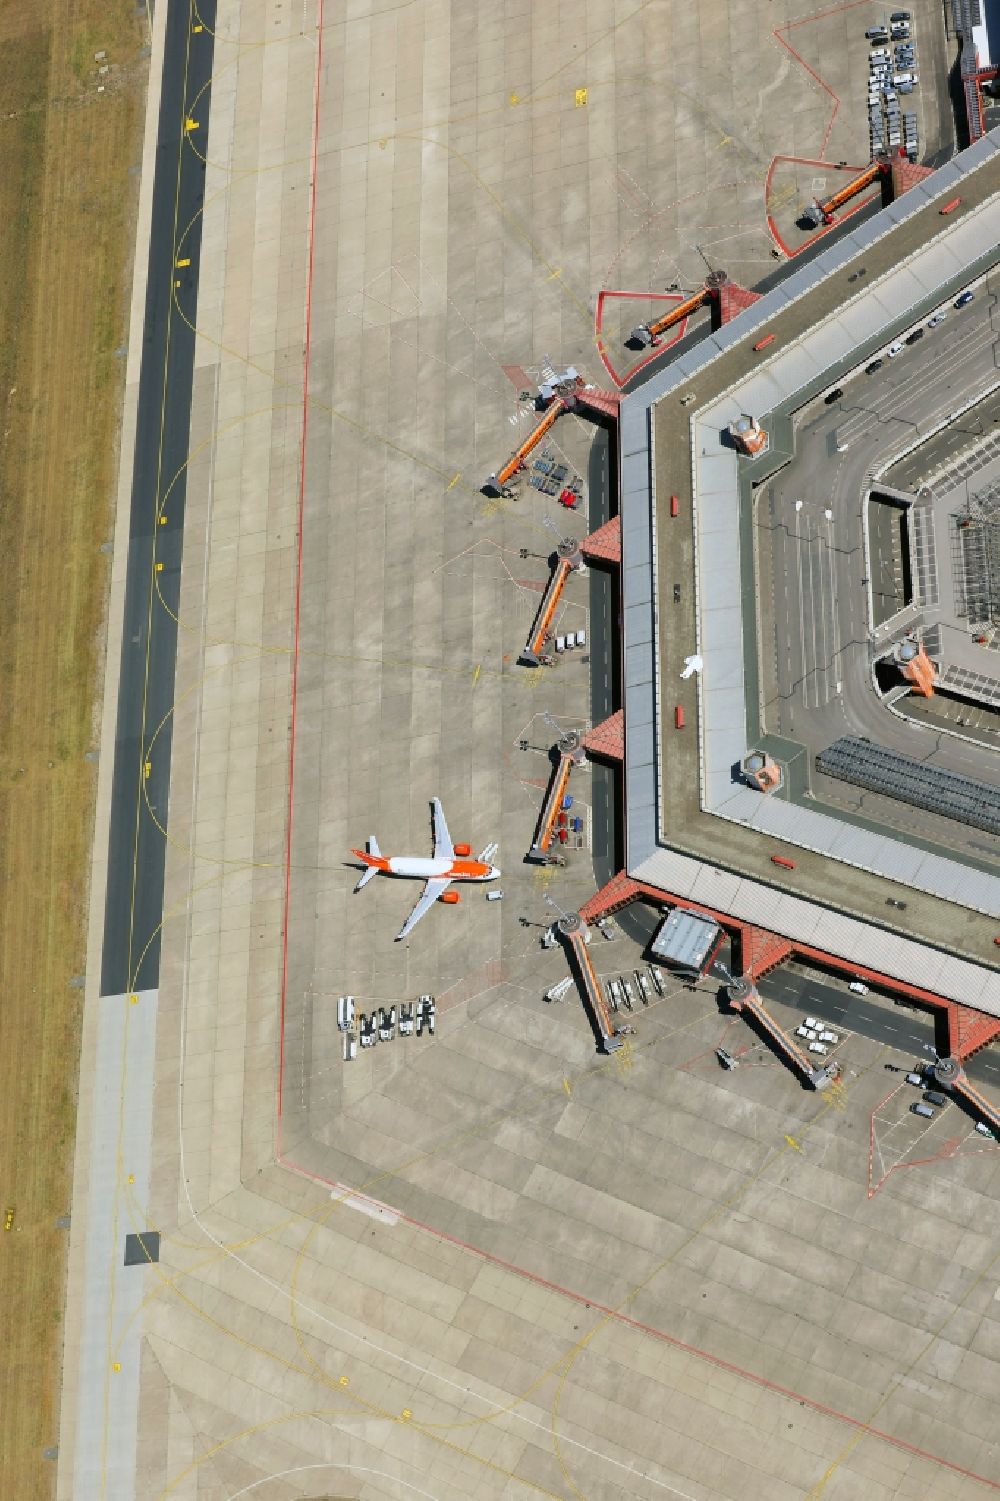 Berlin from above - Flight operations at the terminal of the airport Berlin - Tegel